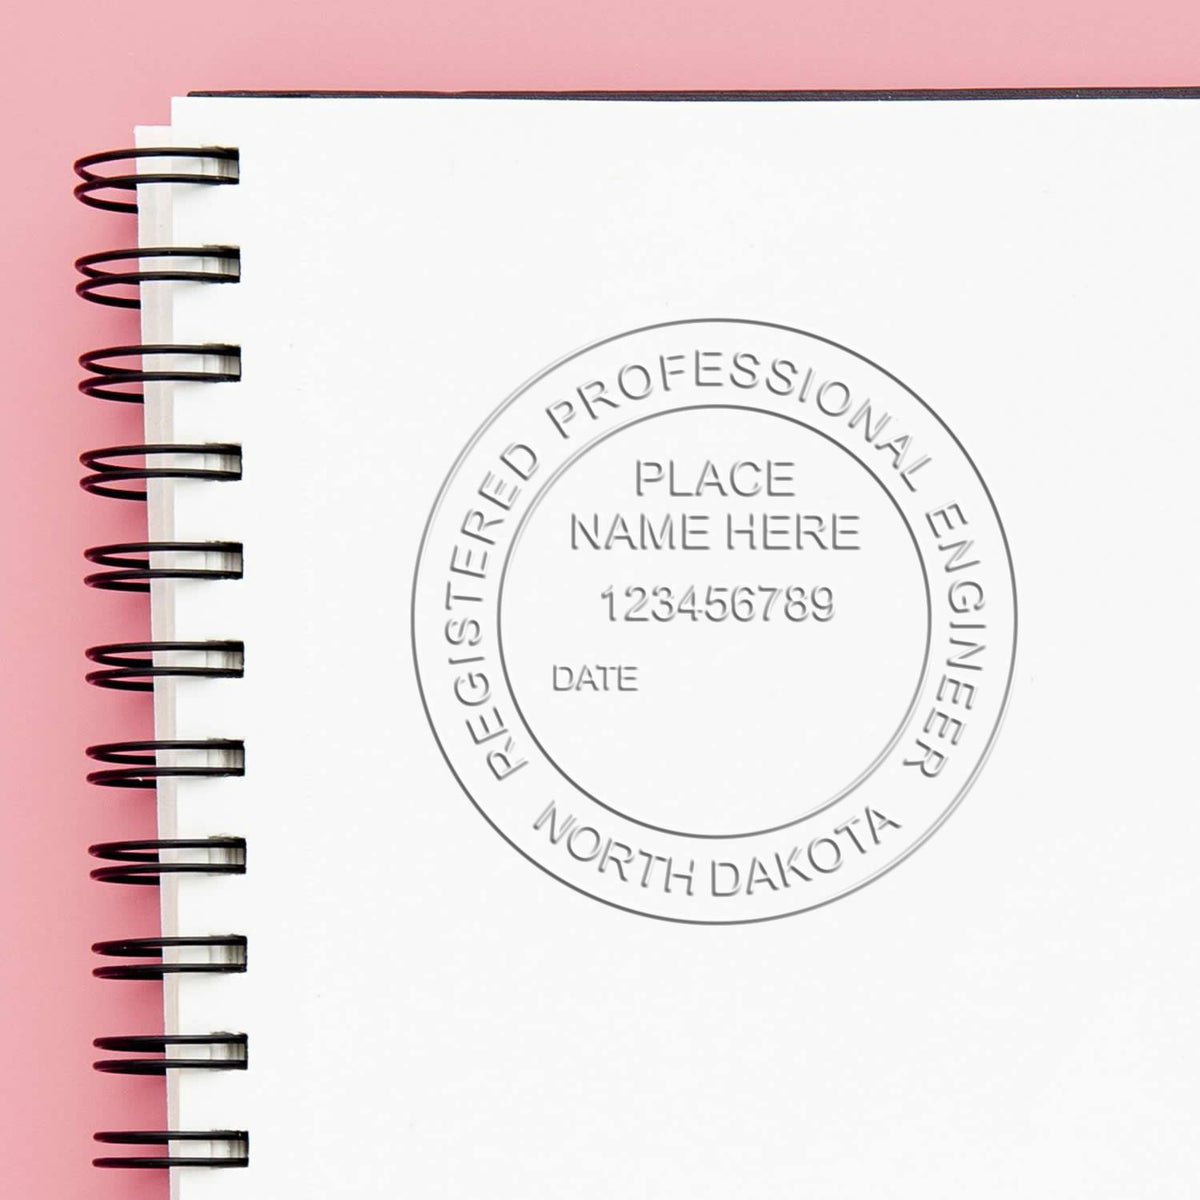 An alternative view of the Heavy Duty Cast Iron North Dakota Engineer Seal Embosser stamped on a sheet of paper showing the image in use